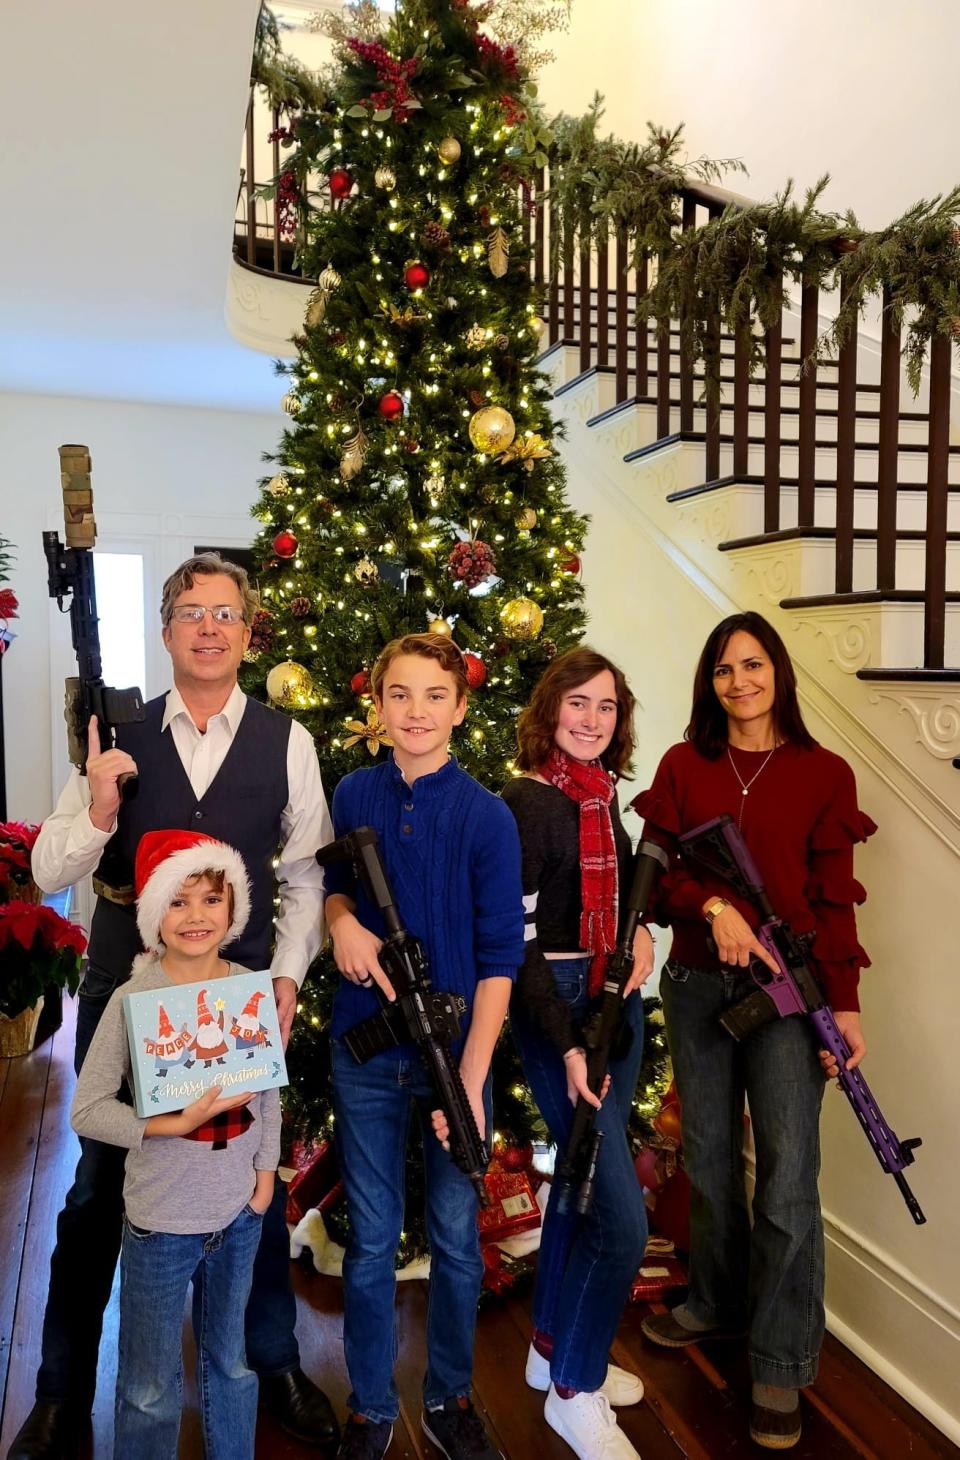 U.S. Rep. Andy Ogles, R-Tenn., who represents the area in Nashville where a gunman killed six inside a school Monday, is seen here in a photo on his Facebook account in December 2021.